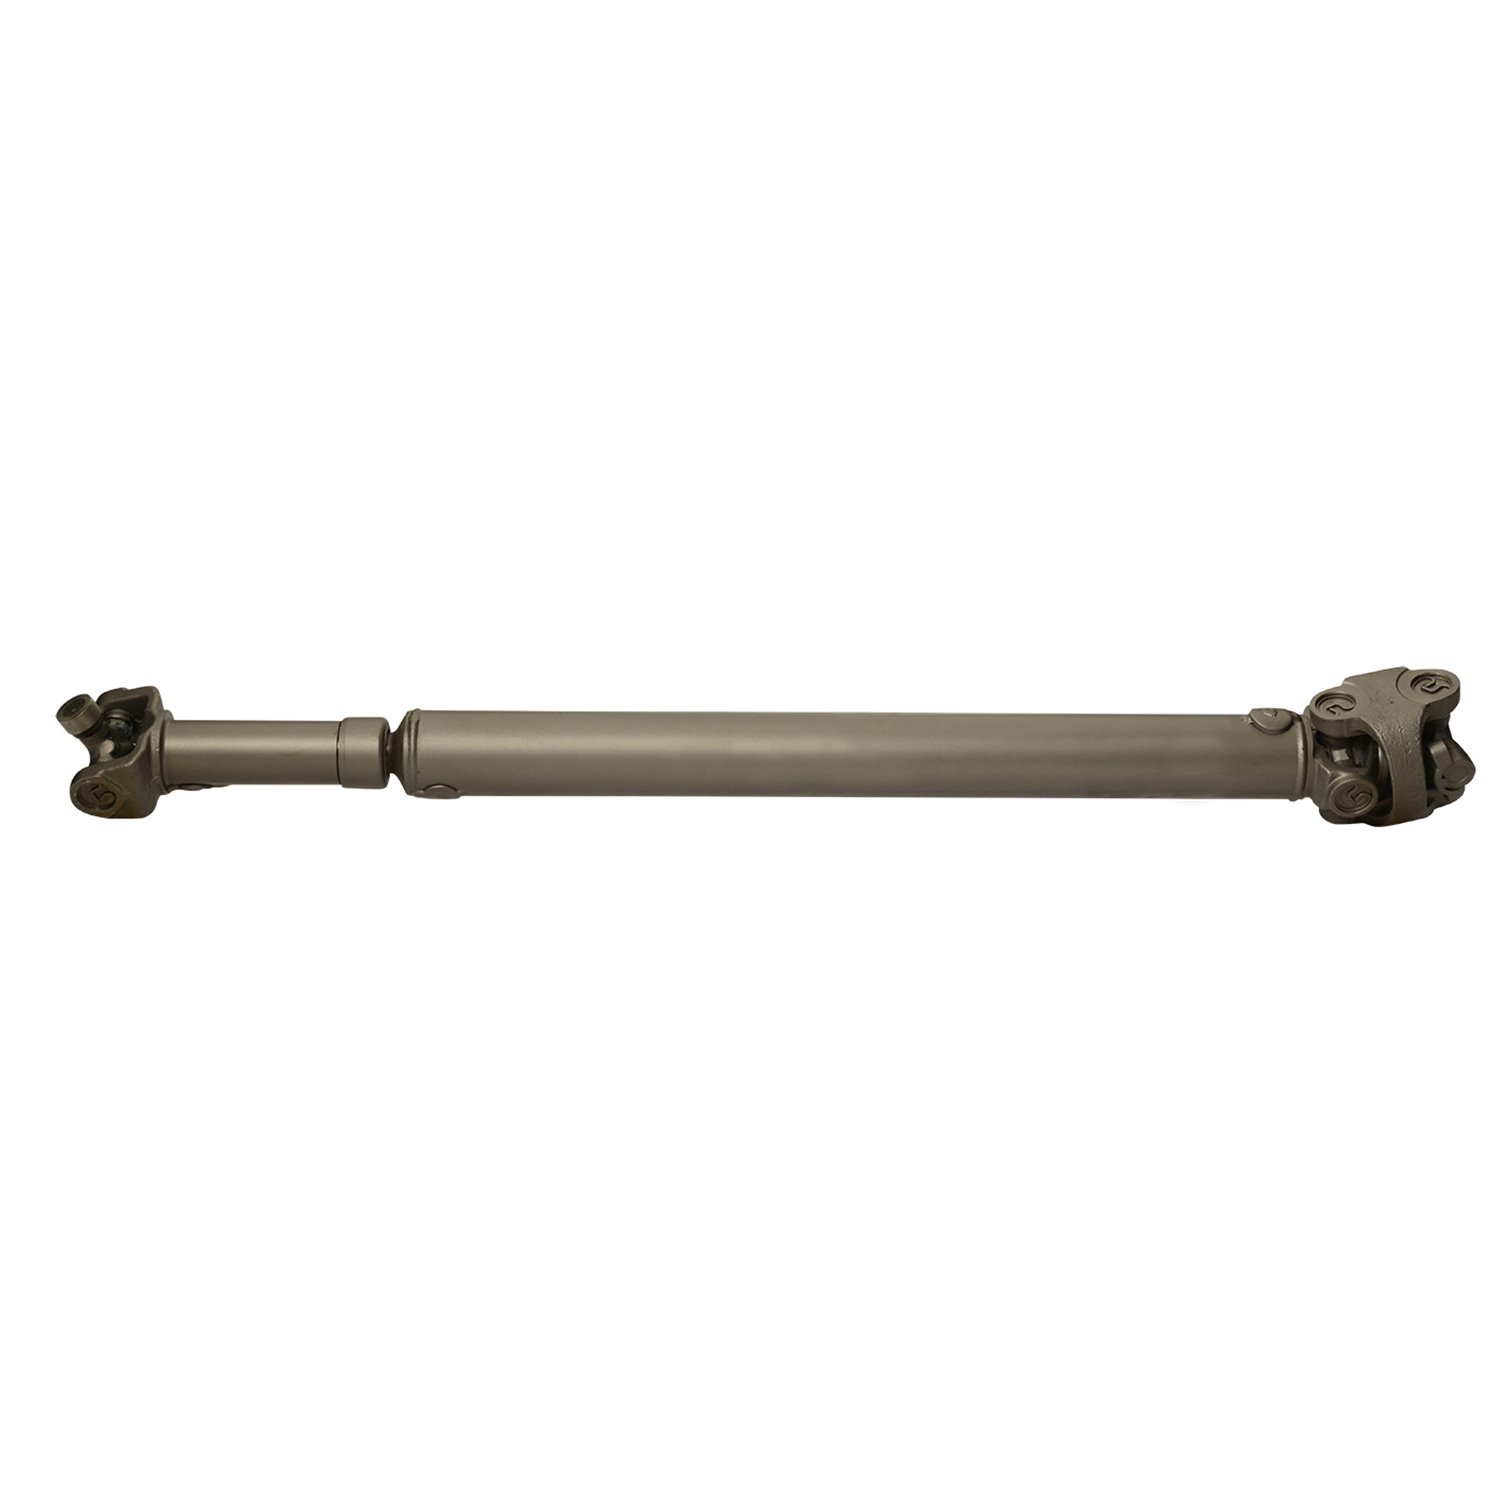 USA Standard ZDS9447 Front Driveshaft, For F350, 38-1/4 in. Center-To-Center